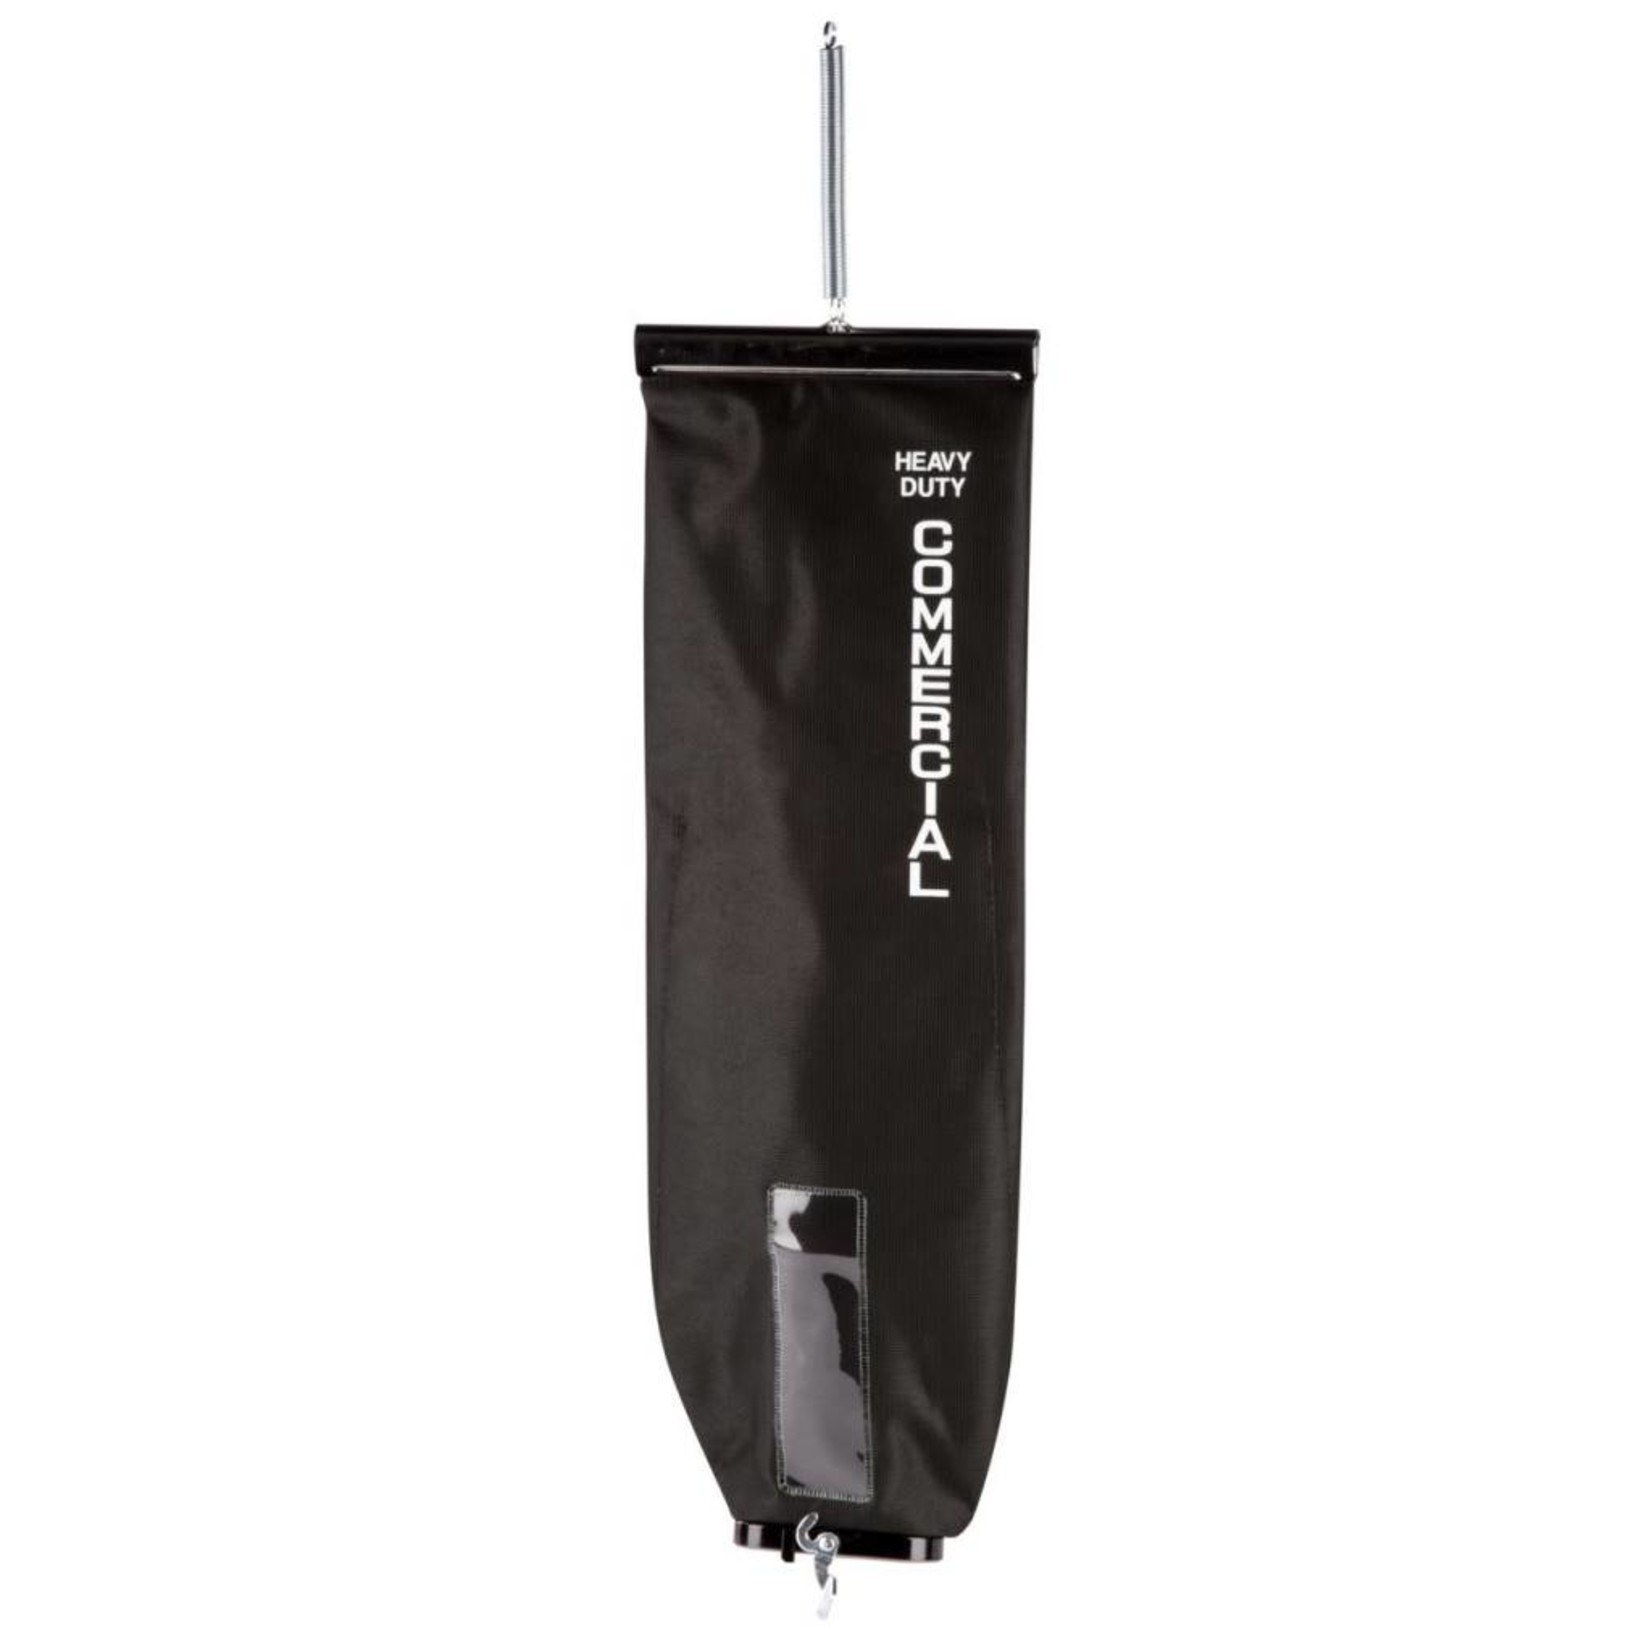 Sanitaire Sanitaire, Eureka Outer Bag Dual Purpose - Shake Out or F&G Bags